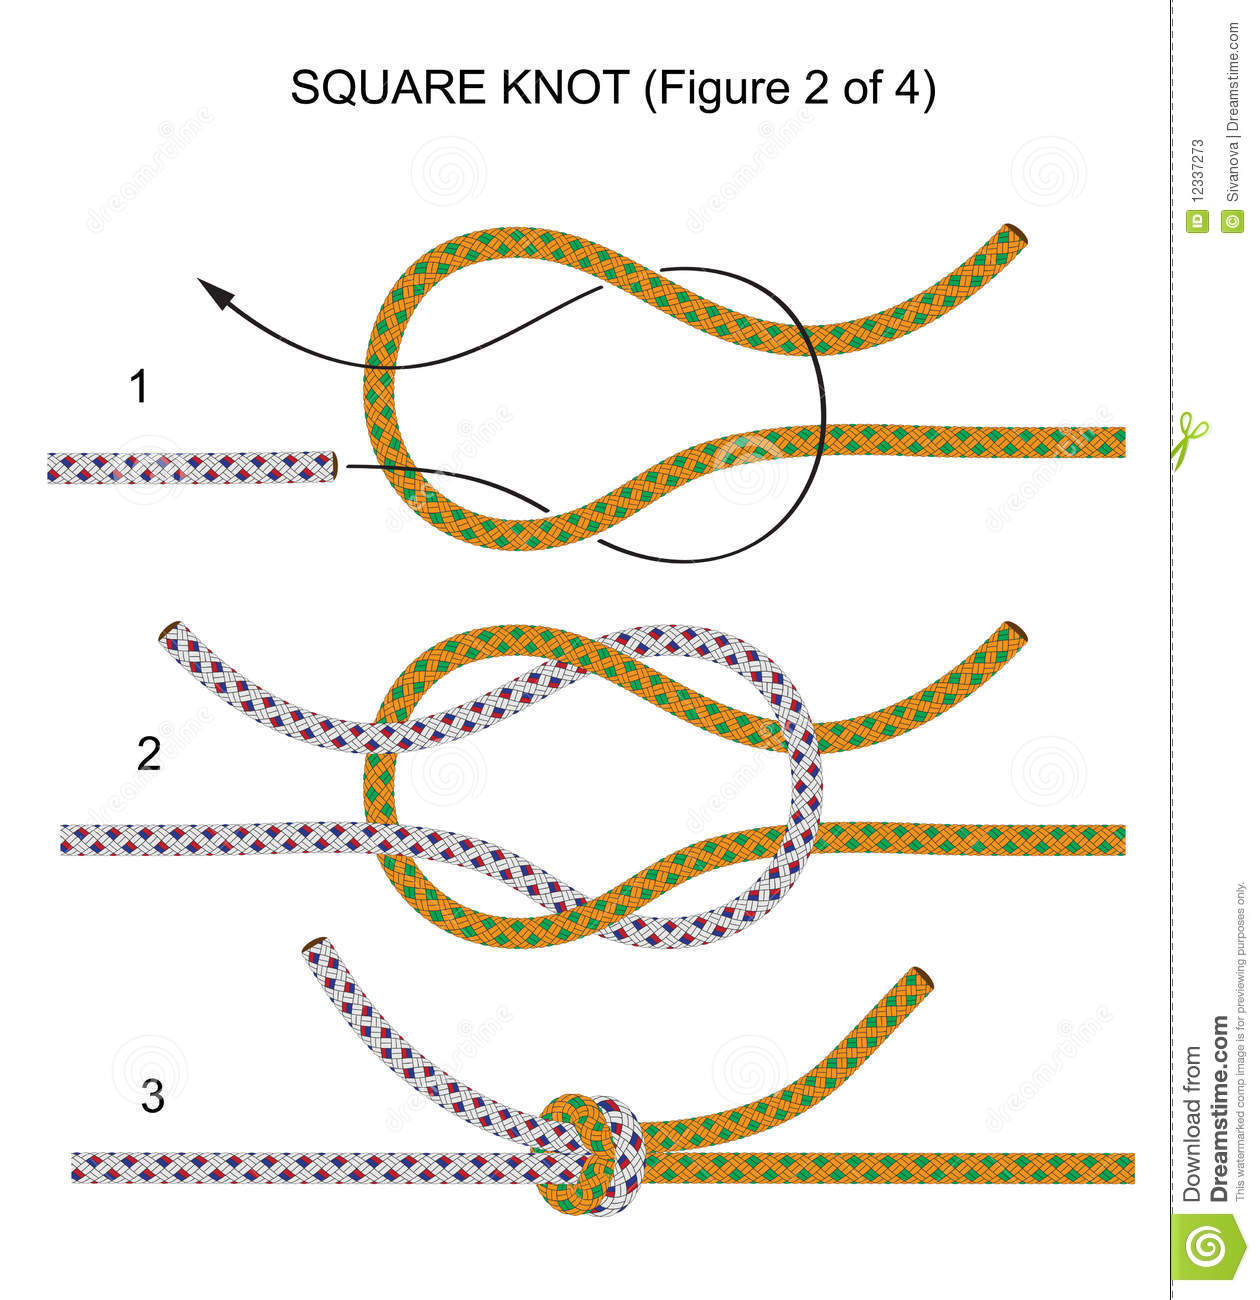 Square Knot  Illustration 2 Of 4  Stock Photos   Image  12337273